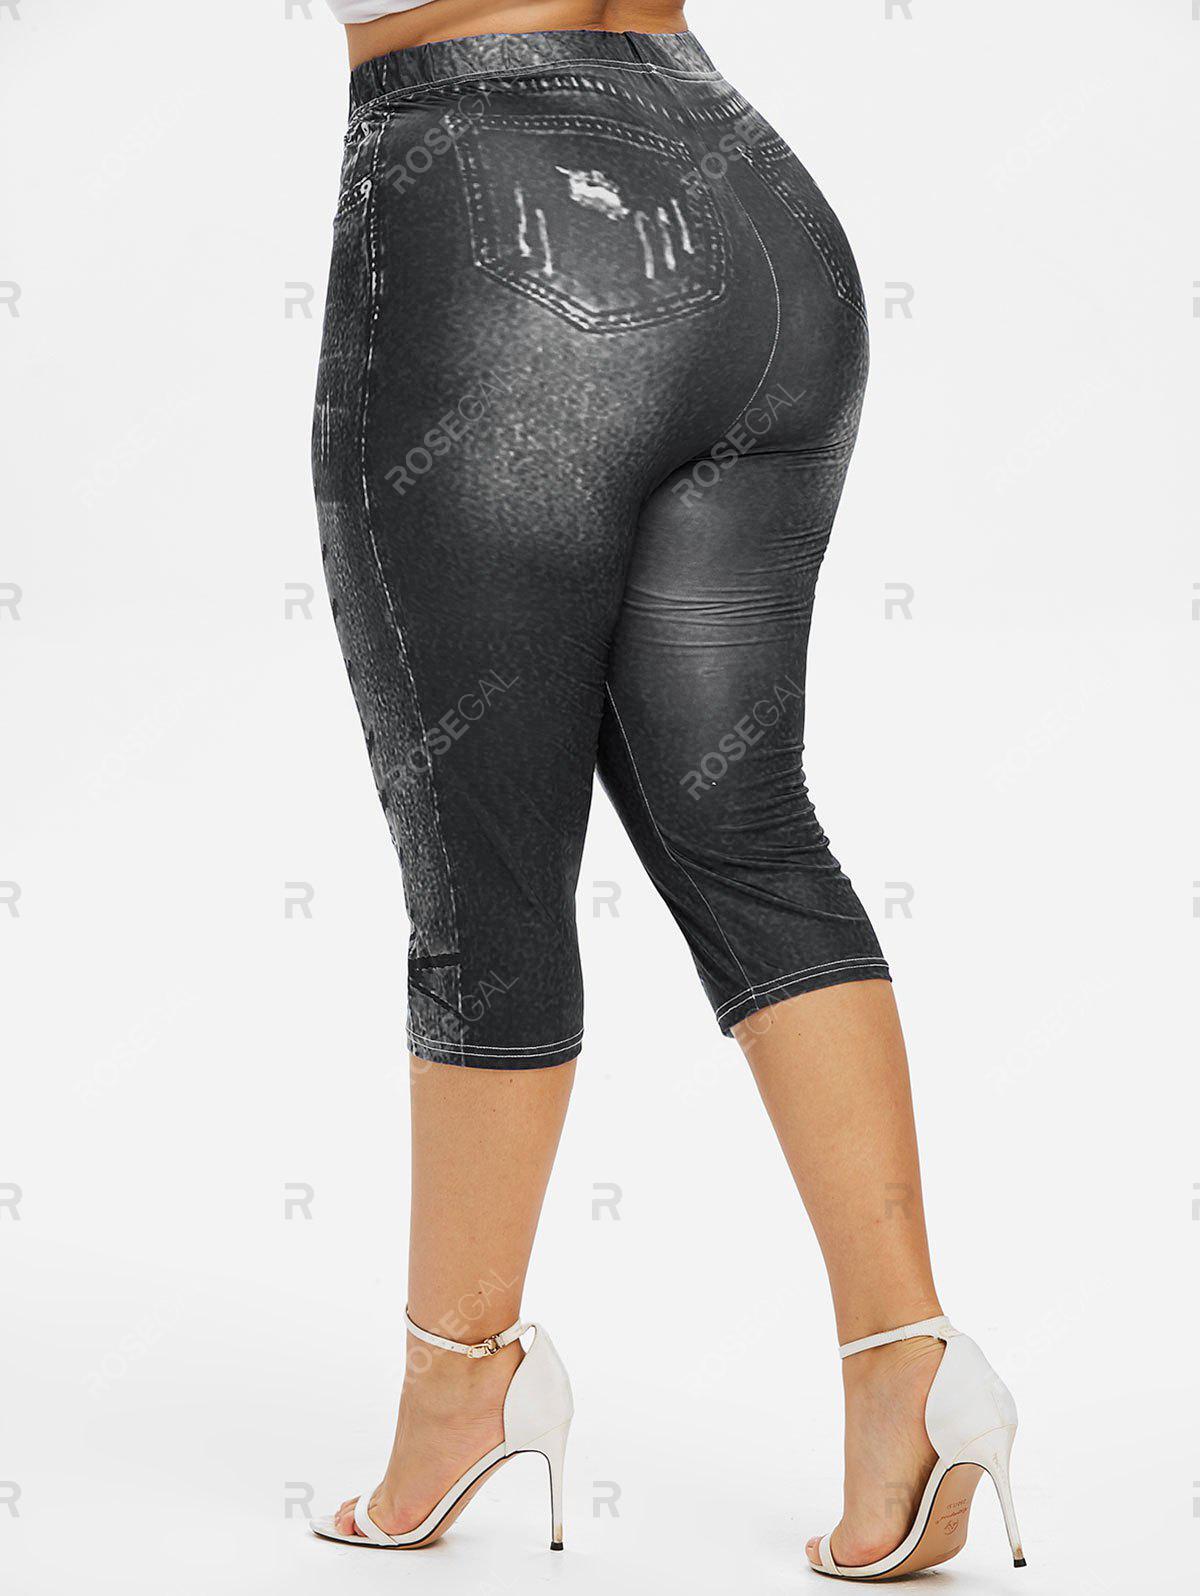 Heart Buckle Layered Tank Top and 3D Lace Up Jean Print Capri Leggings Plus Size Outfit